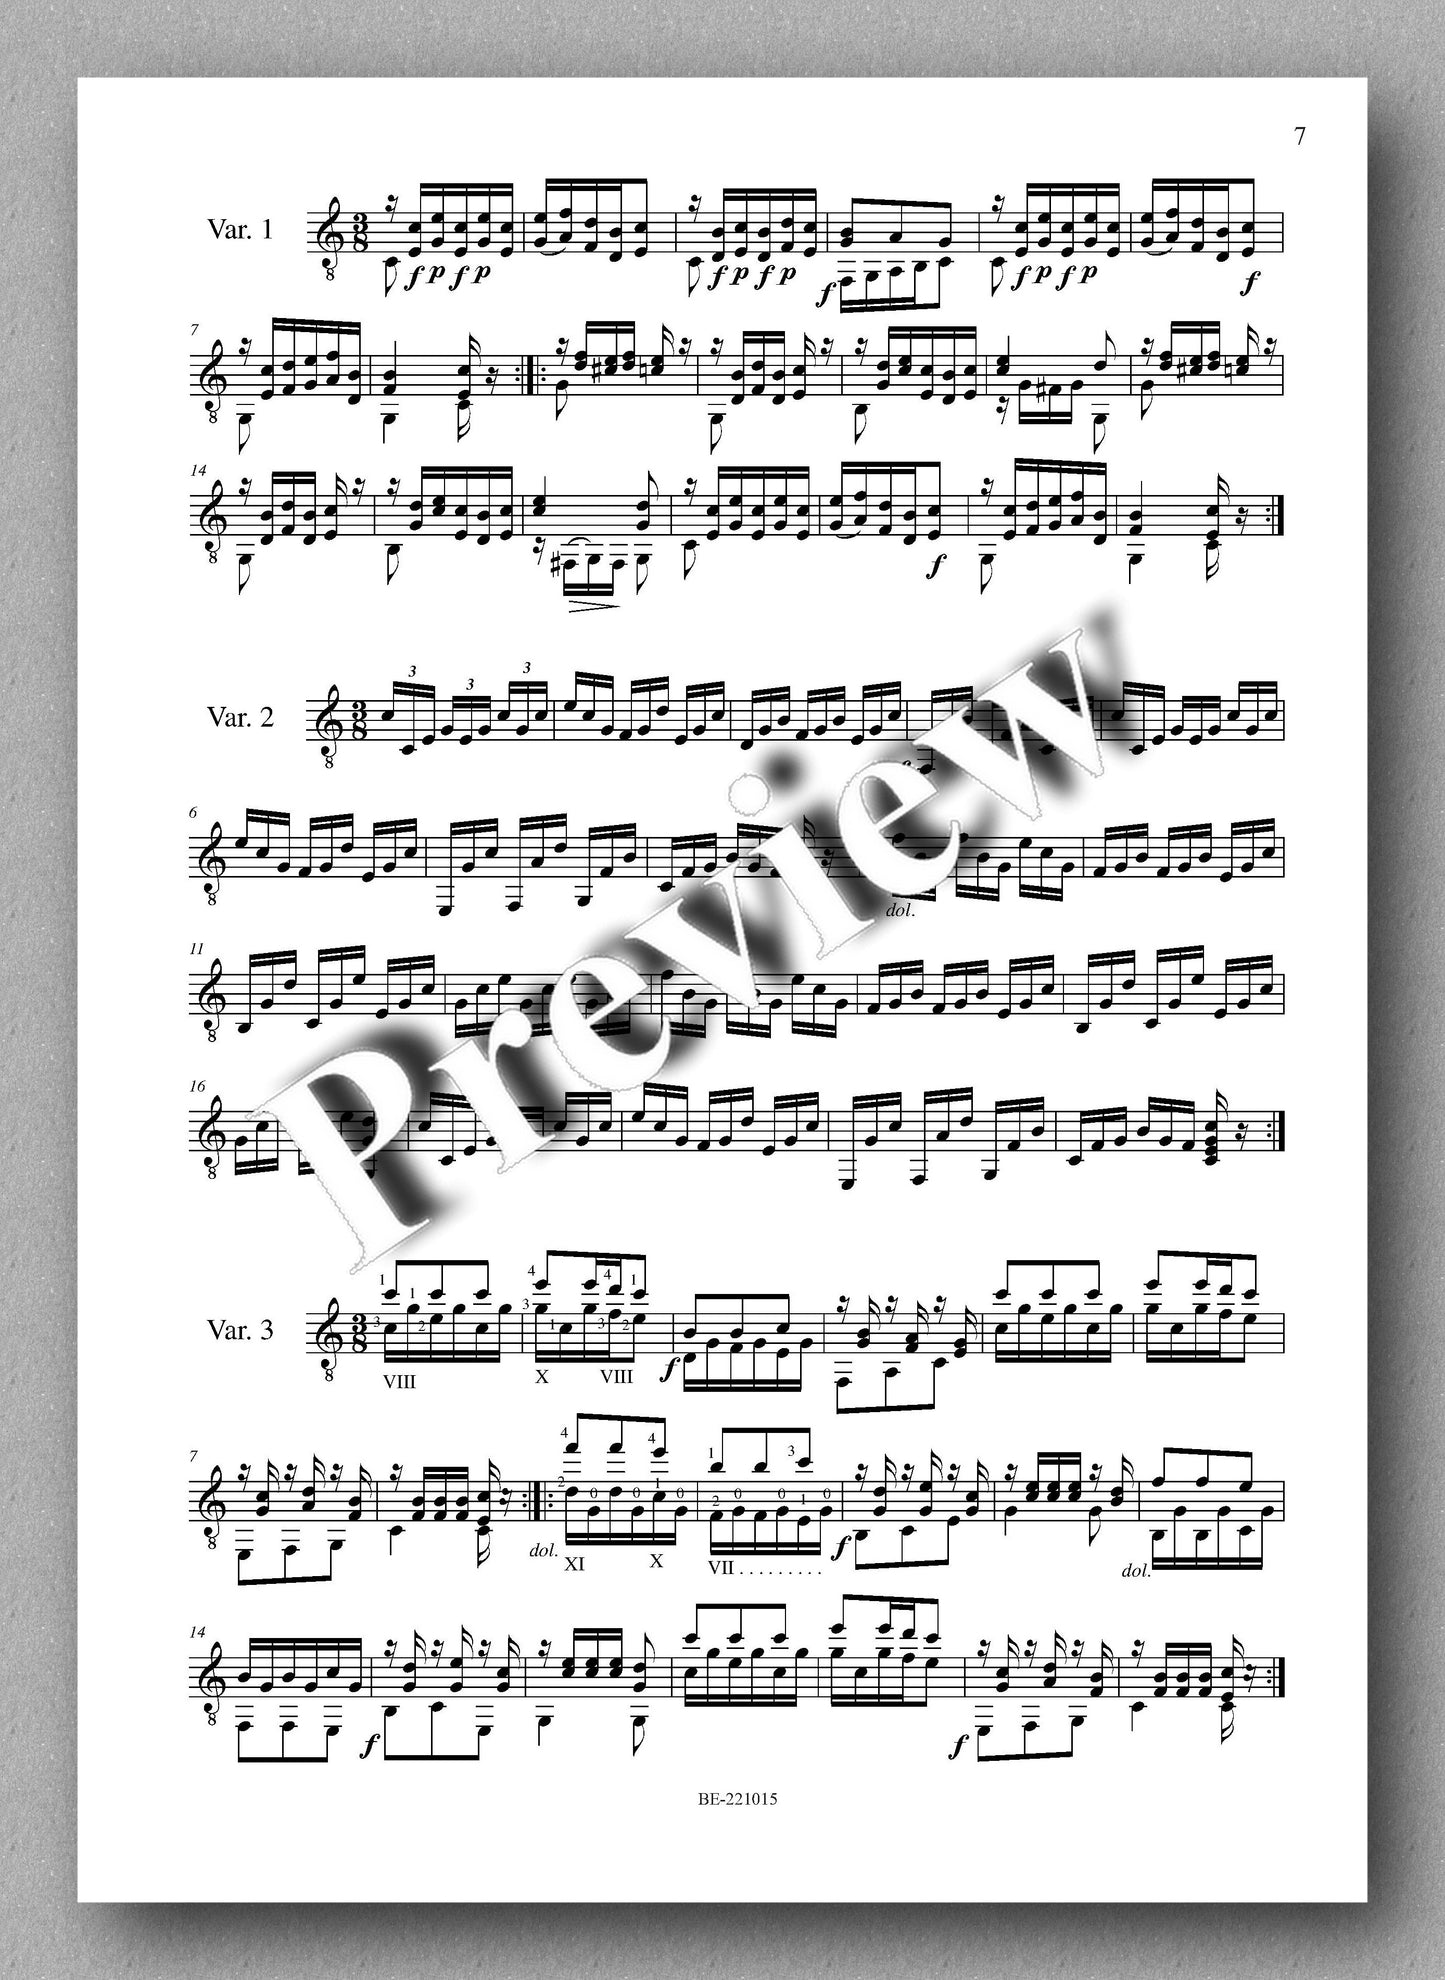 Molino, Collected Works for Guitar Solo, Vol. 10 - preview of the music score 2